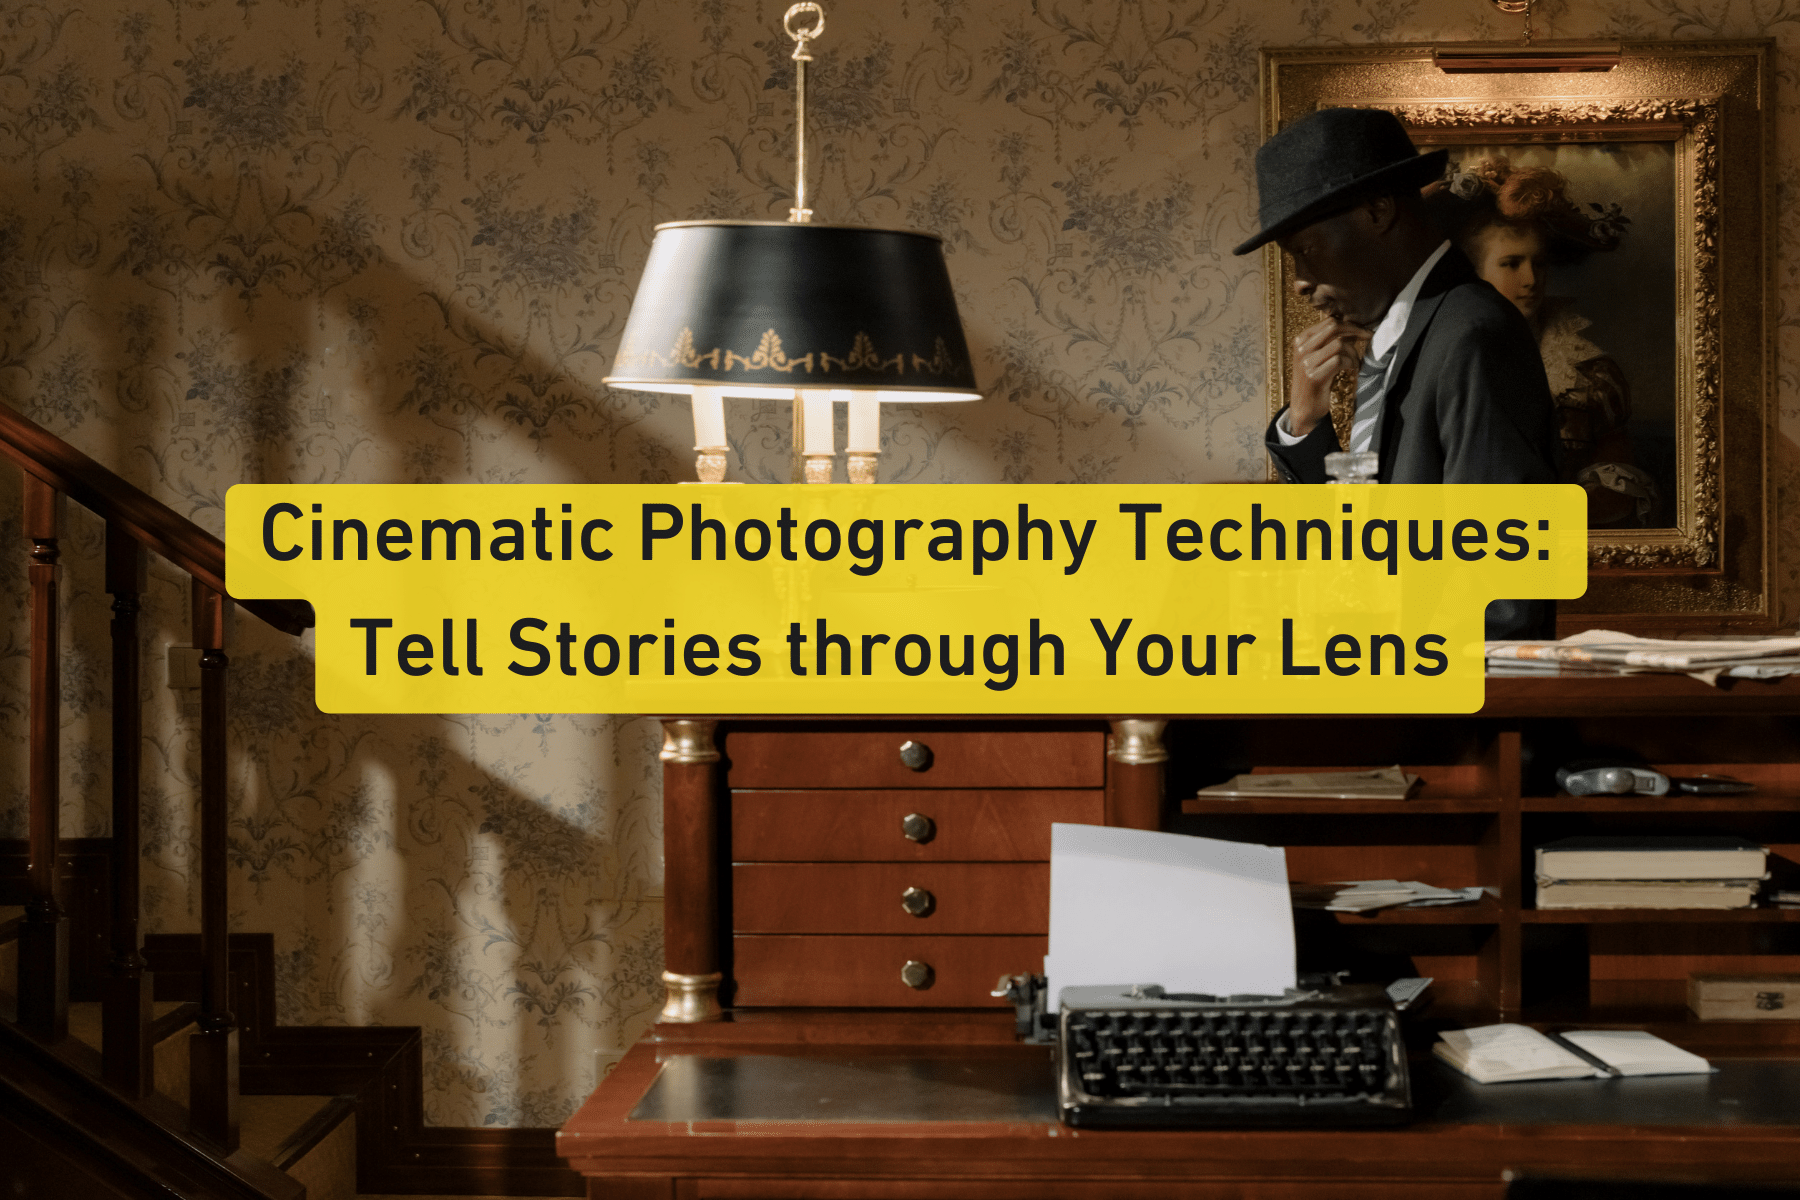 Cinematic Photography Techniques: Tell Stories through Your Lens - B&C Camera